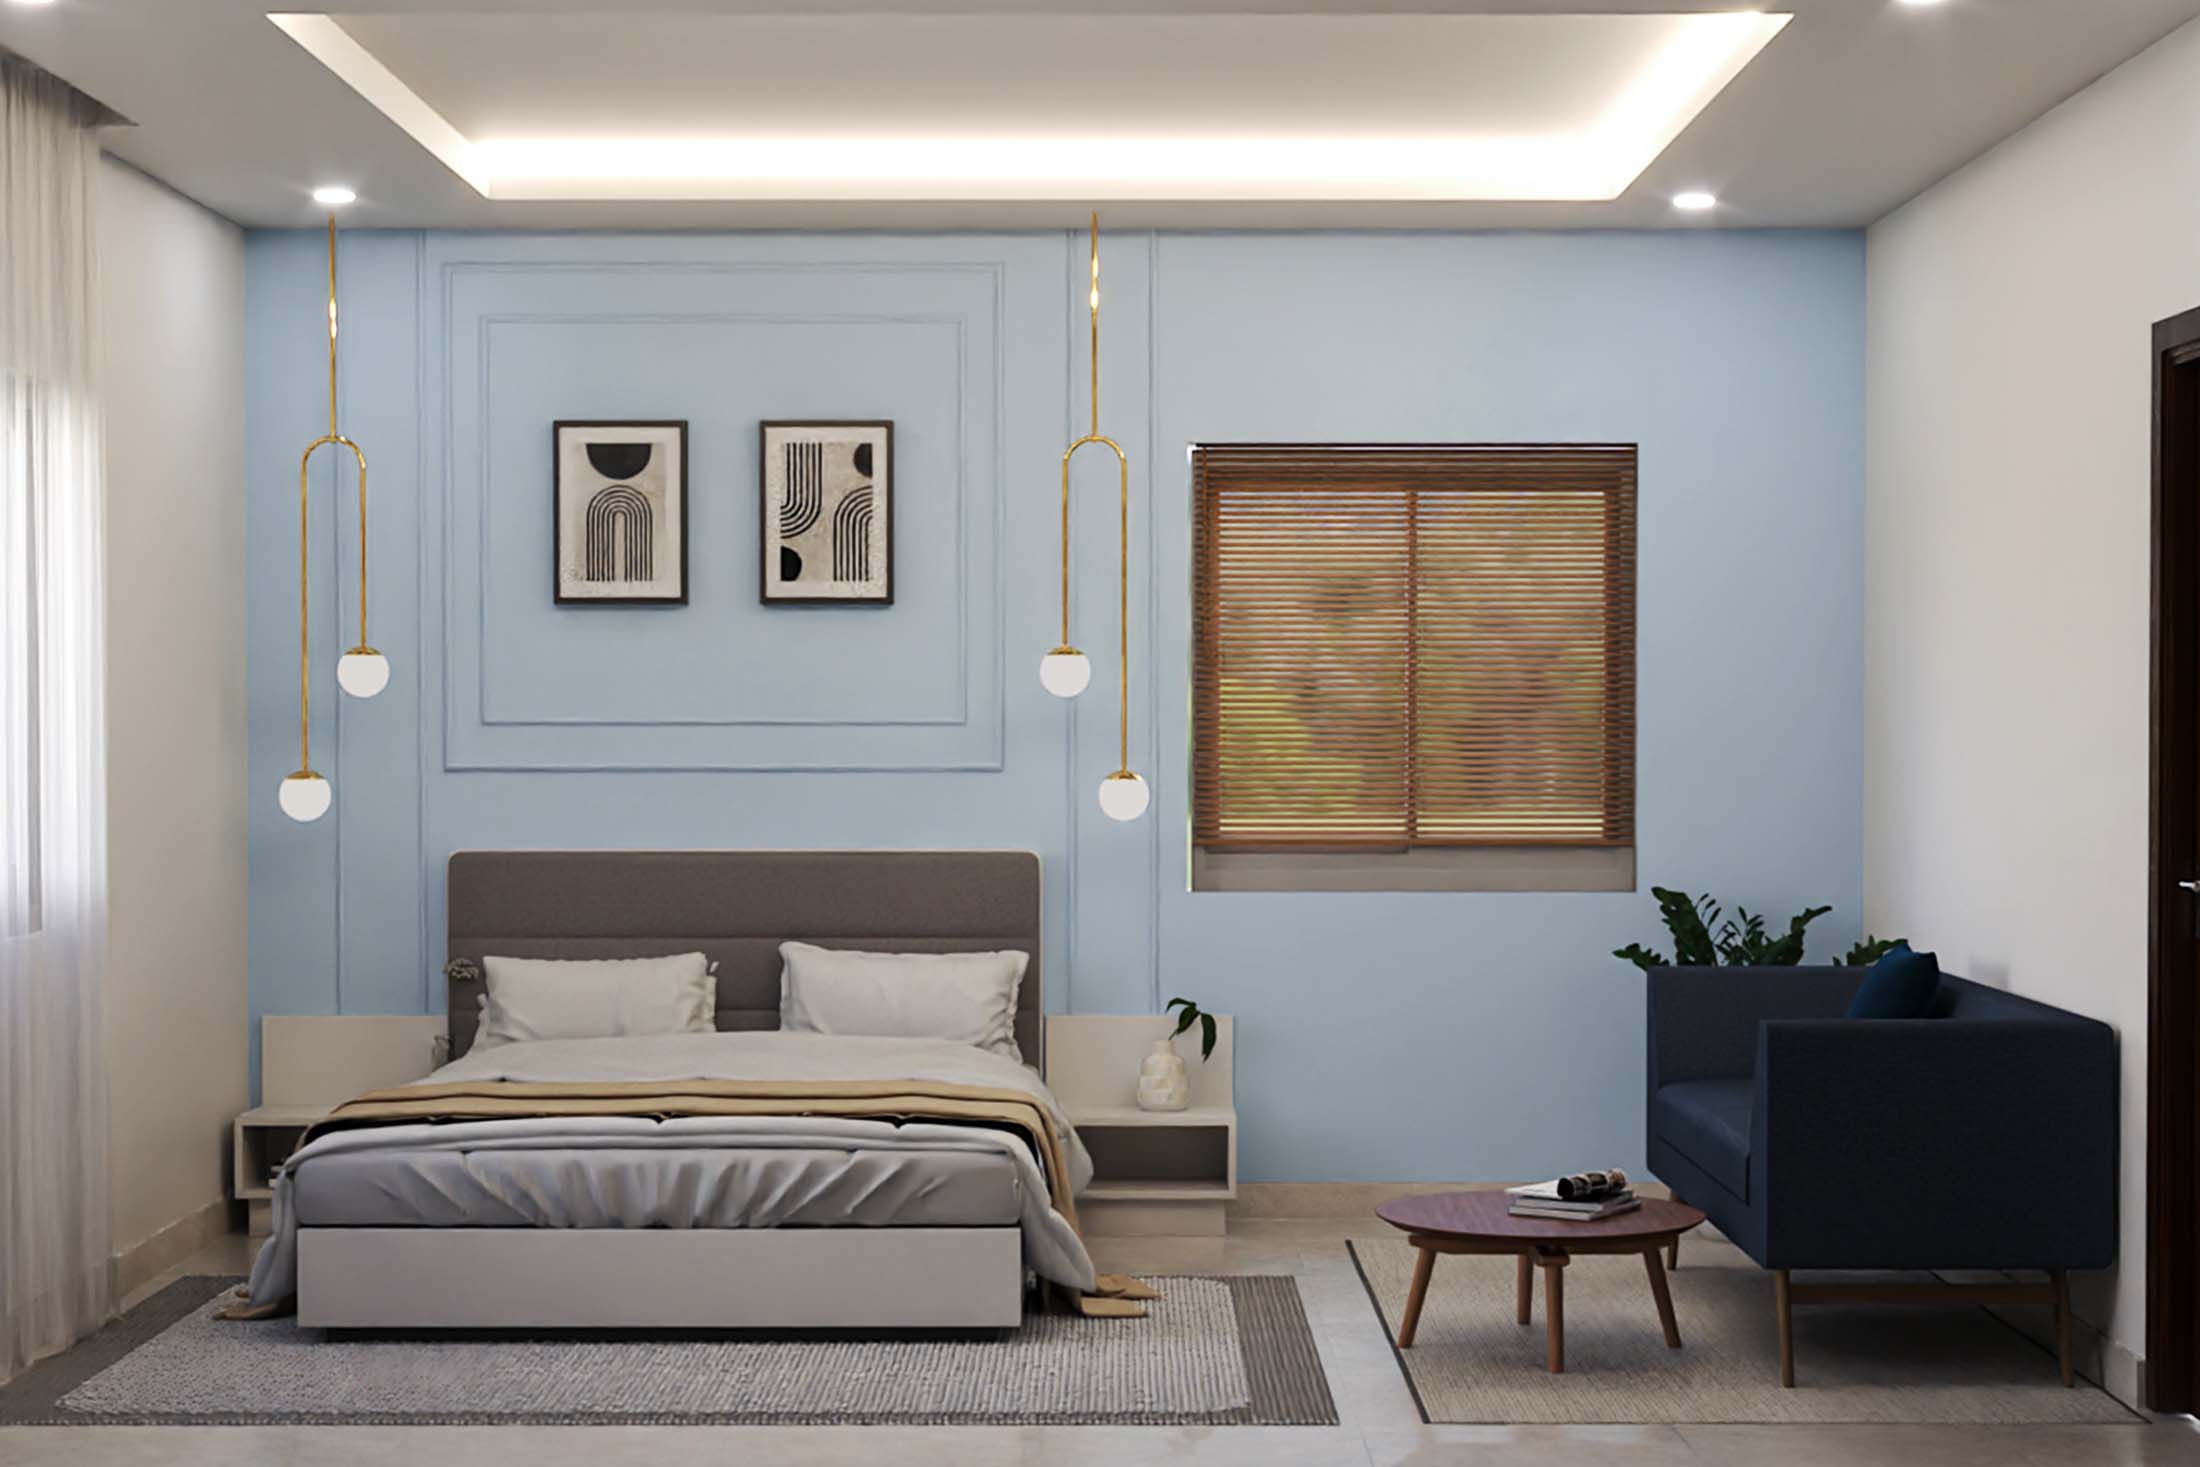 Contemporary Master Bedroom Design With Light Blue Walls